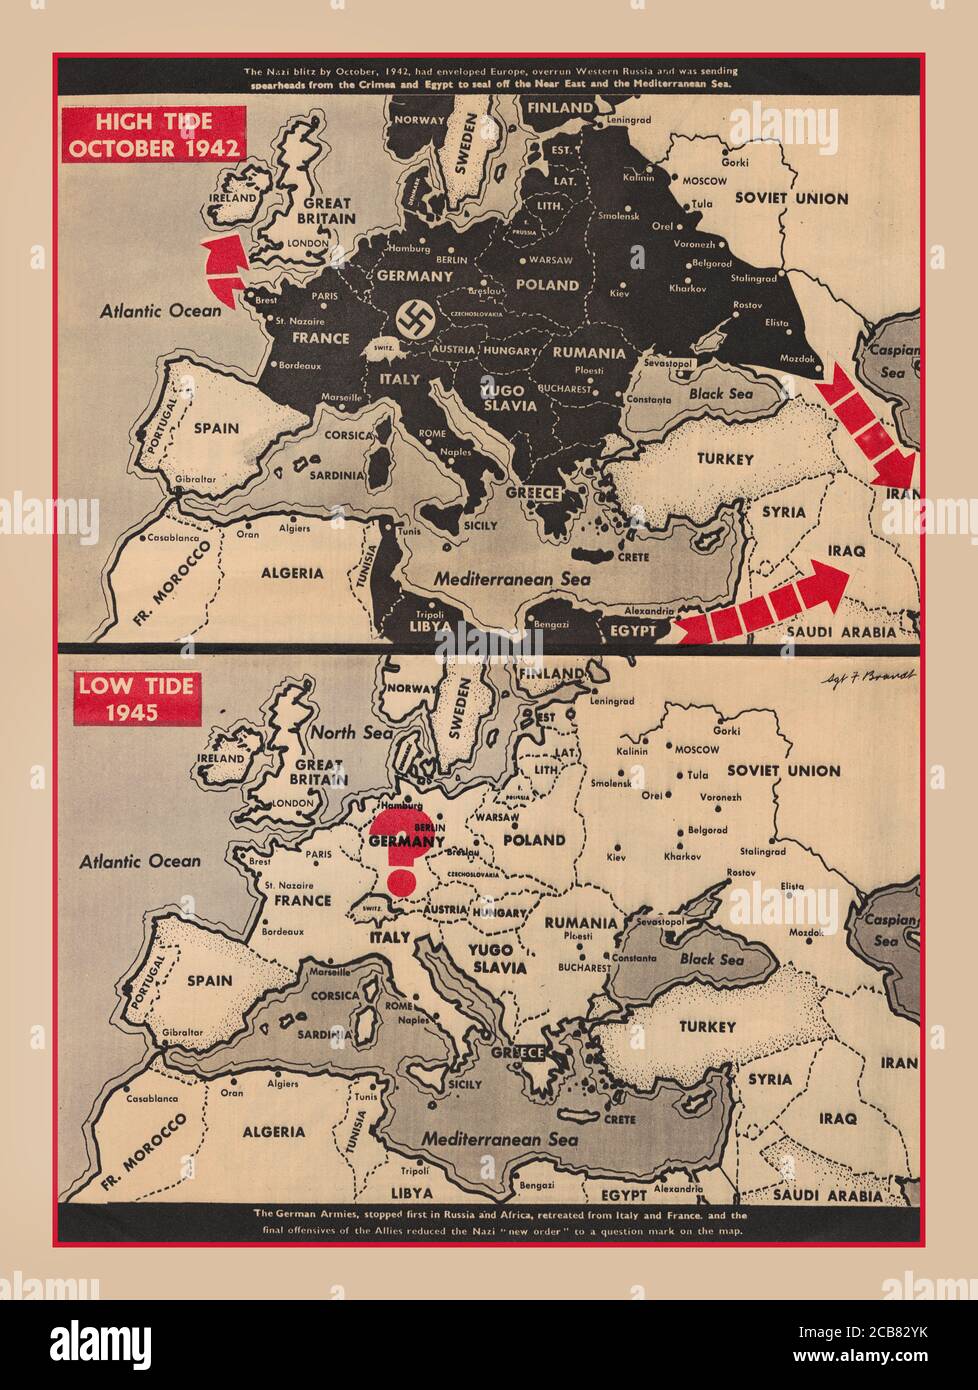 1940’s WW2 Europe Propaganda maps published in Yank, the Army Weekly, celebrating Germany's surrender in May 1945. The upper map, 'High Tide October 1942,' shows Europe, with portions of North Africa, in Nazi black. 'The Nazi blitz by October, 1942, had enveloped Europe, overrun Western Russia and was sending spearheads from the Crimea and Egypt to seal off Near East & the Mediterranean Sea.' The lower map, 'Low Tide 1945,' shows entire map in white, & Nazi swastika replaced with a red question mark over Germany. 'The German Armies, stopped first in Russia Africa then Italy & France Stock Photo